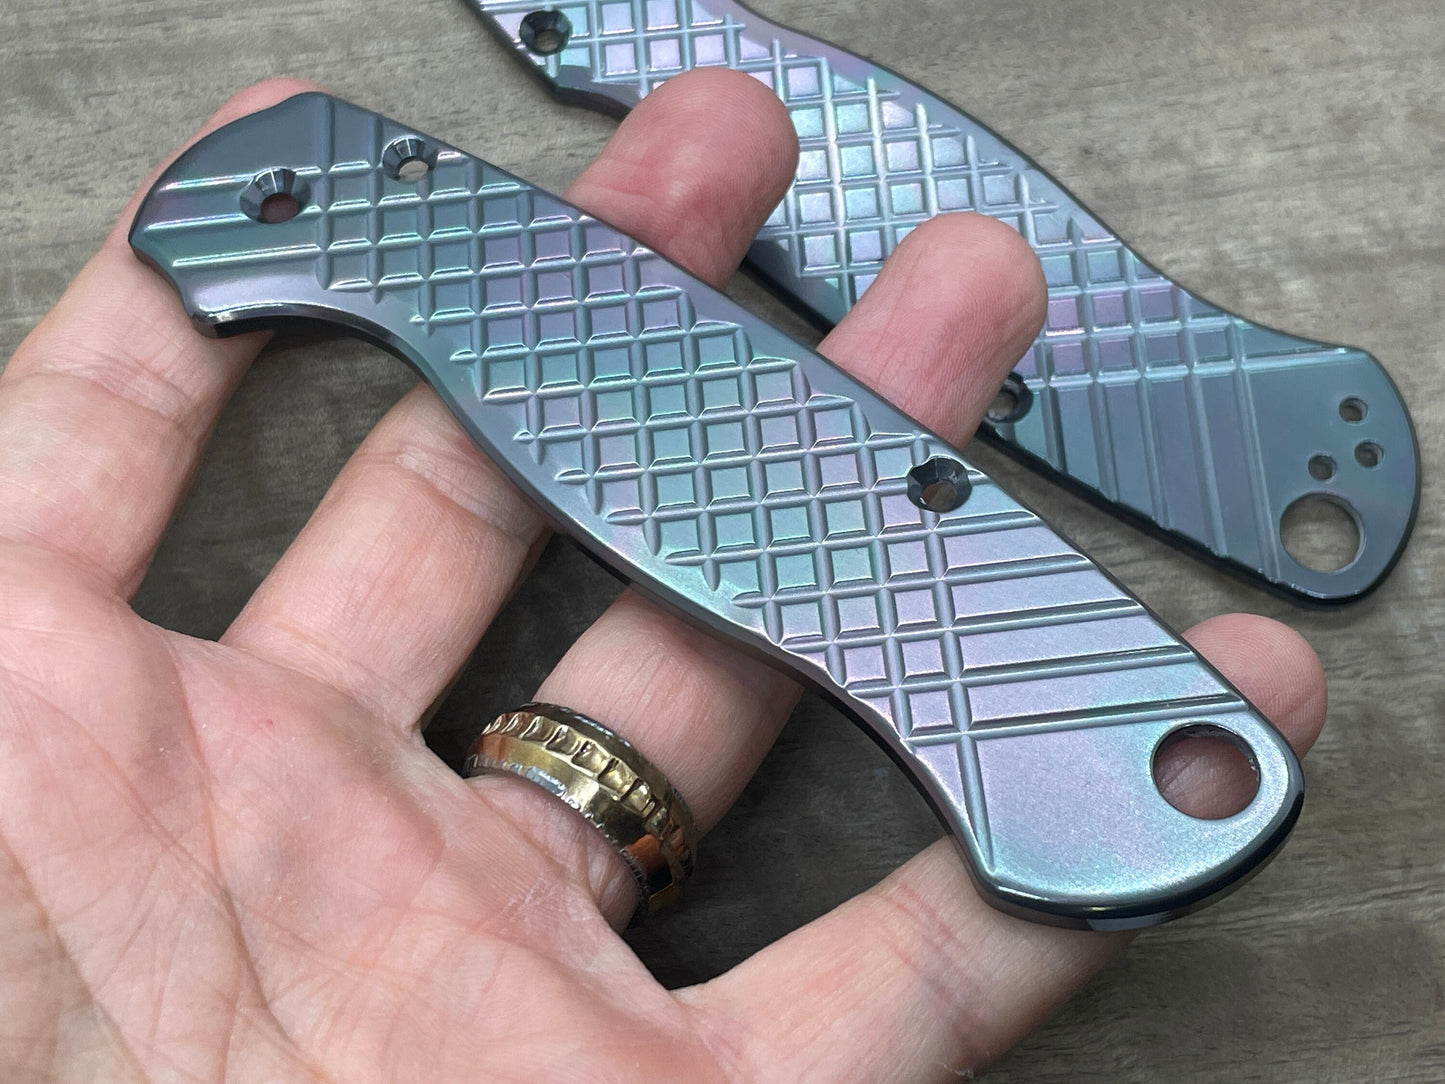 Oil Slick FRAG milled Zirconium scales for Spyderco Paramilitary 2 PM2